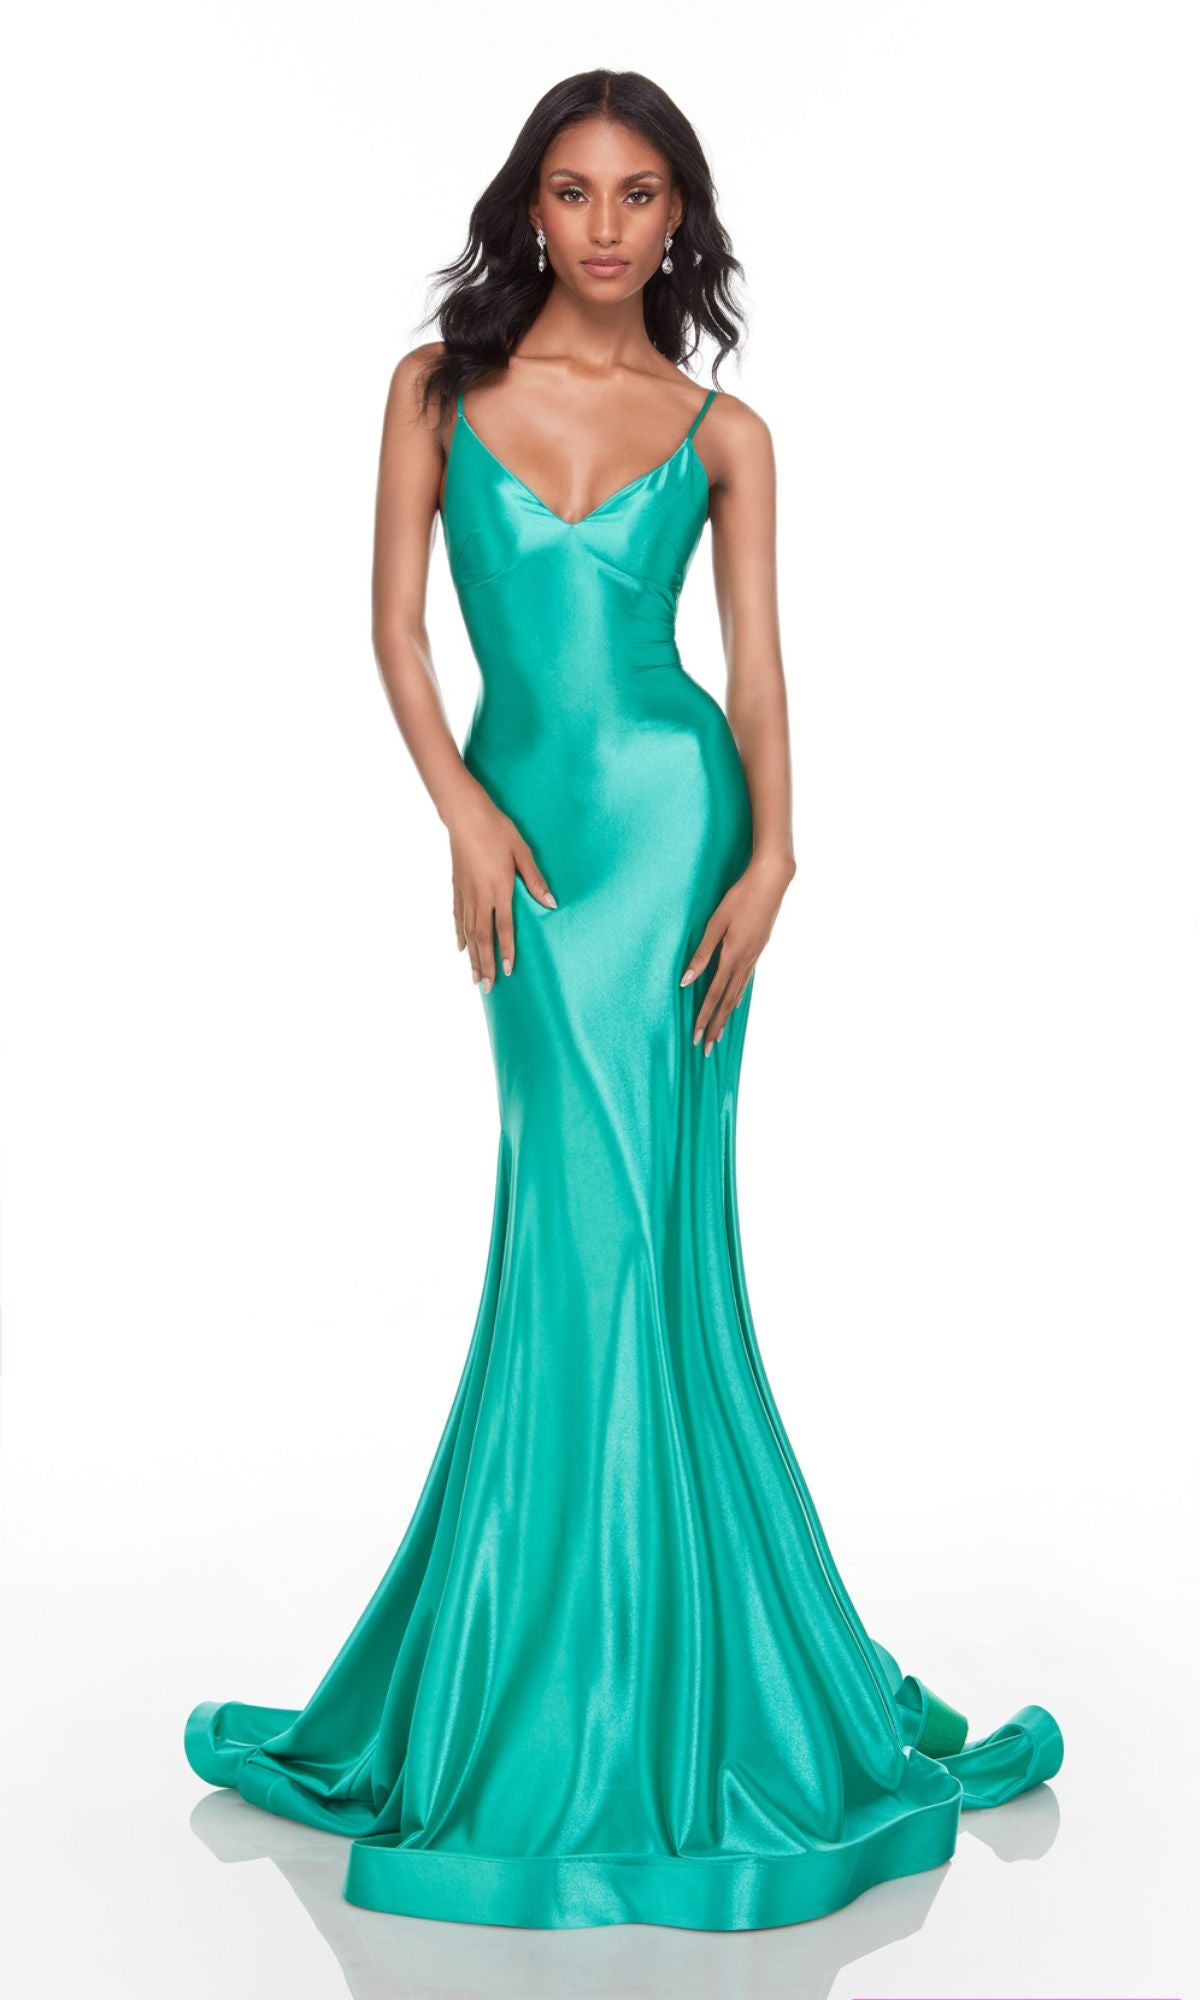 Satin Long Gold Prom Dress with Strappy Open Back